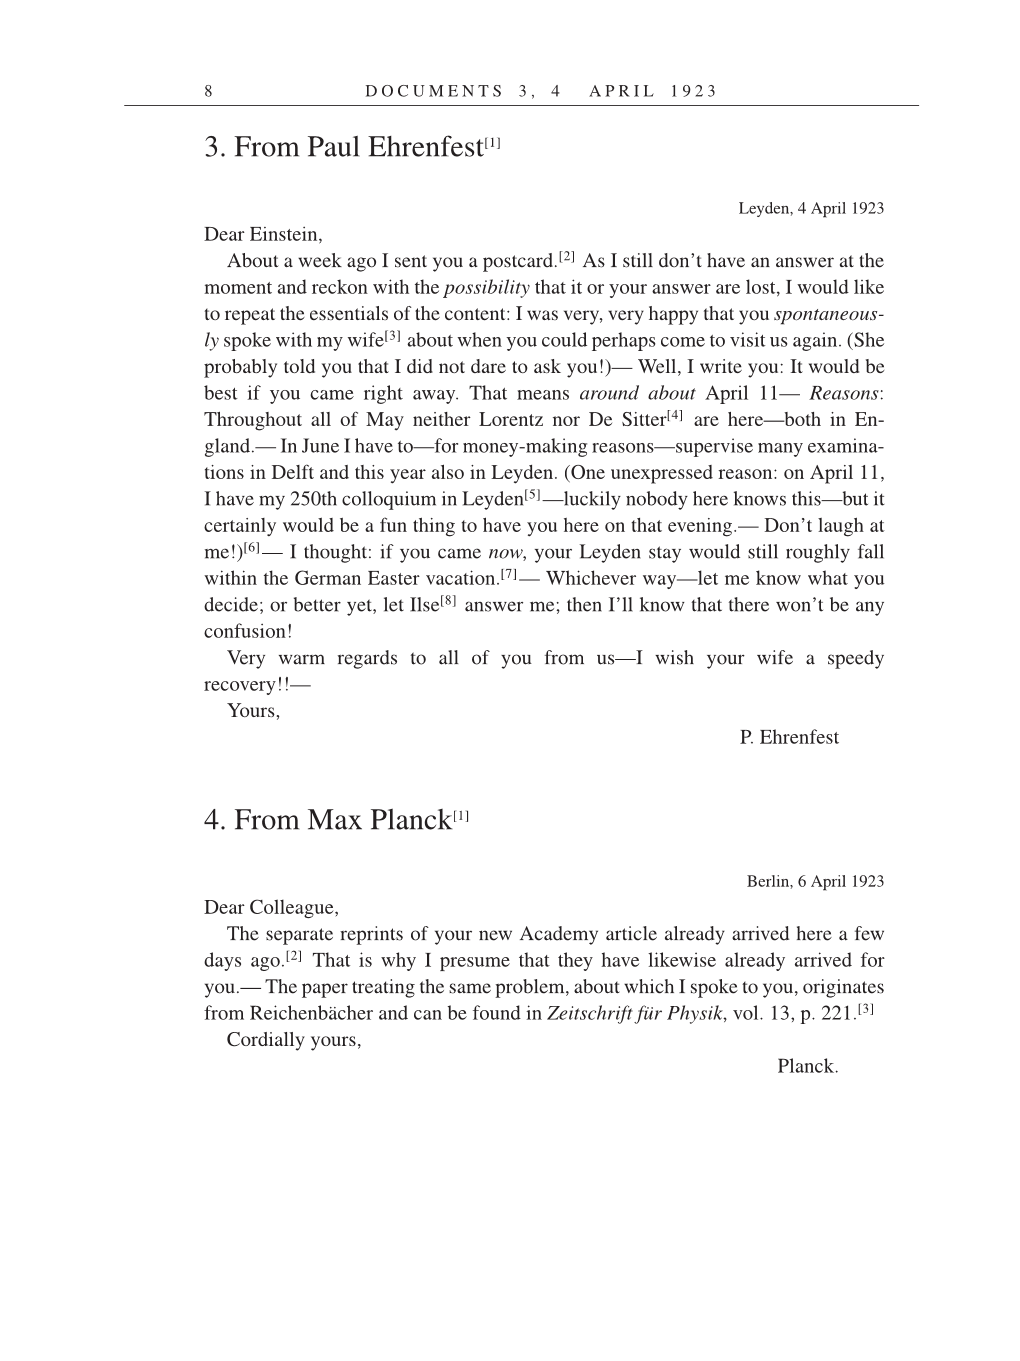 Volume 14: The Berlin Years: Writings & Correspondence, April 1923-May 1925 (English Translation Supplement) page 8